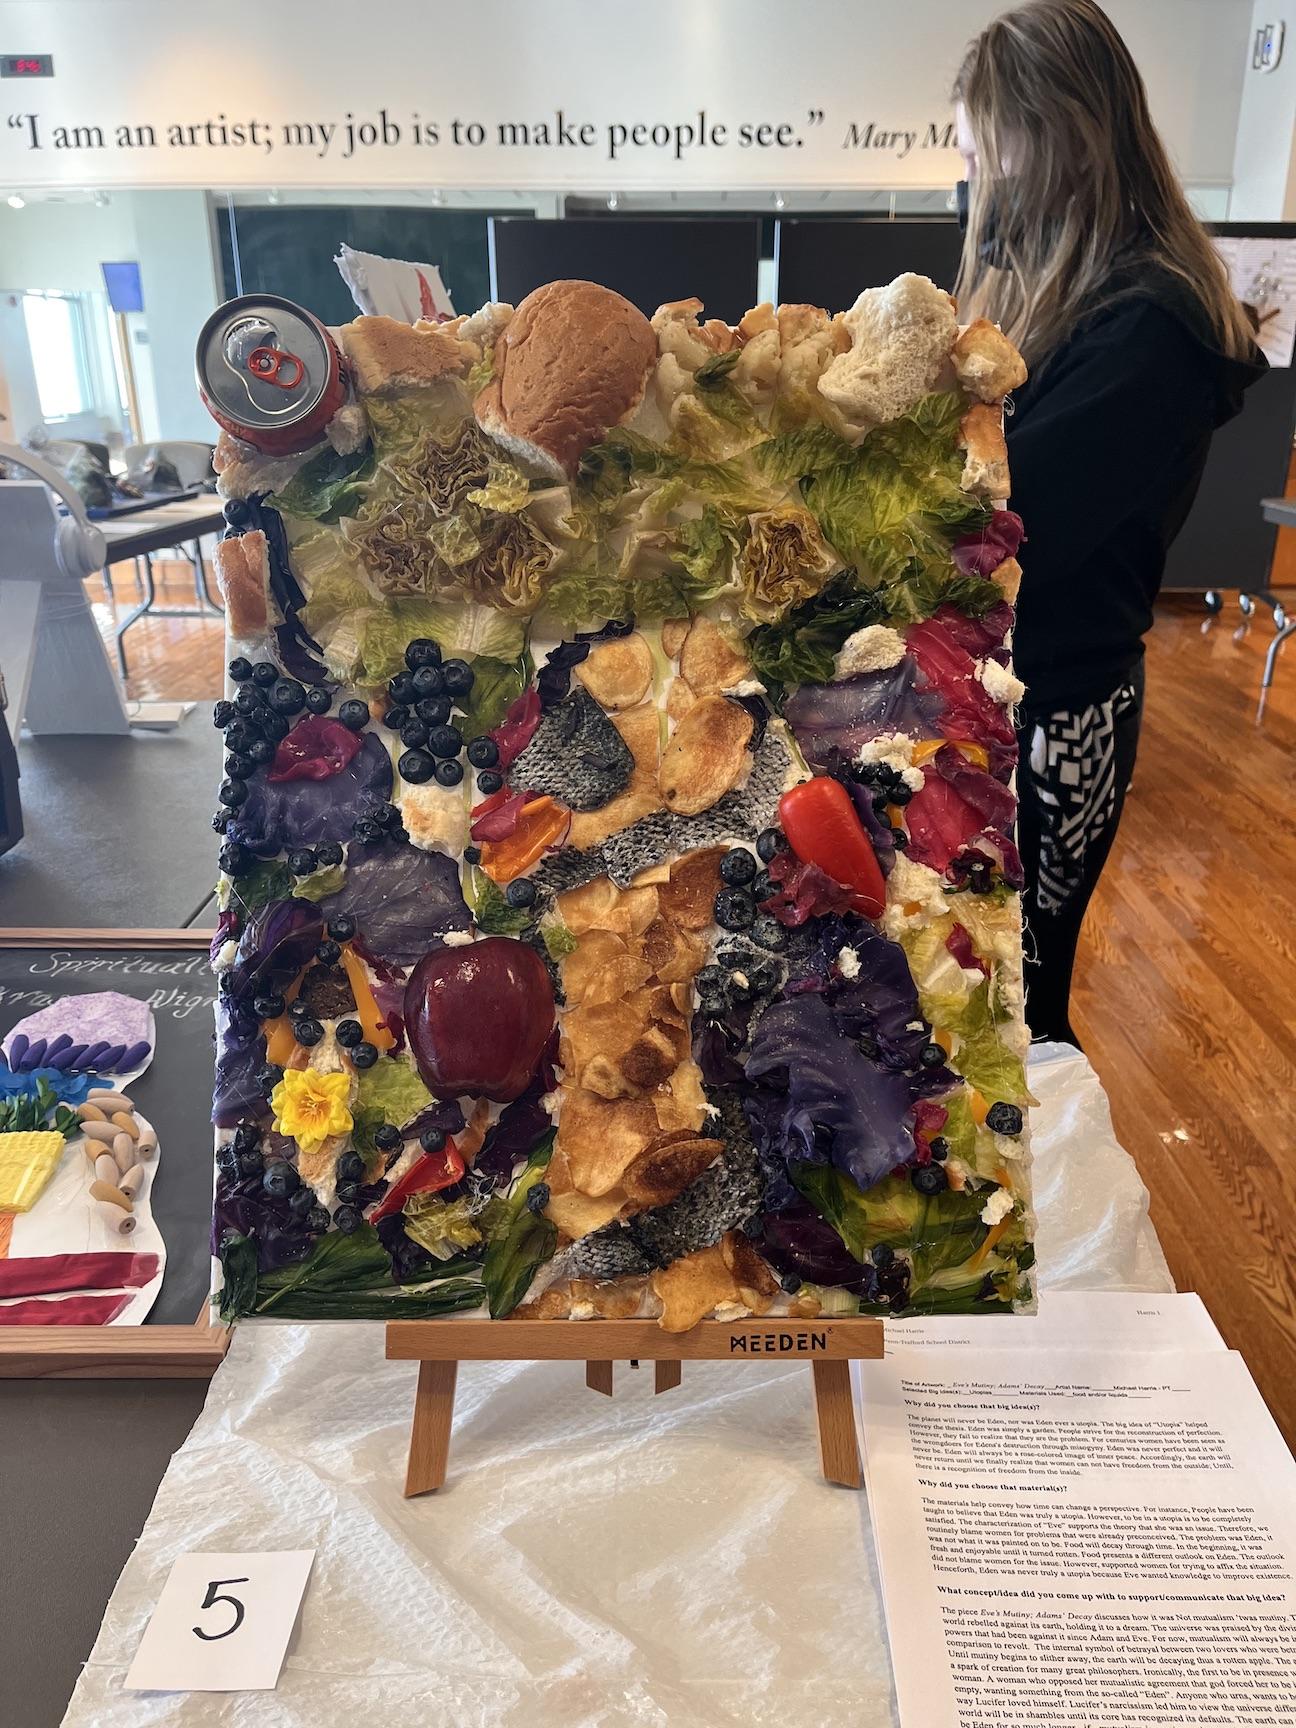 Eve's Mutiny; Adam’s Decay by Michael Harris was made entirely of recycled food